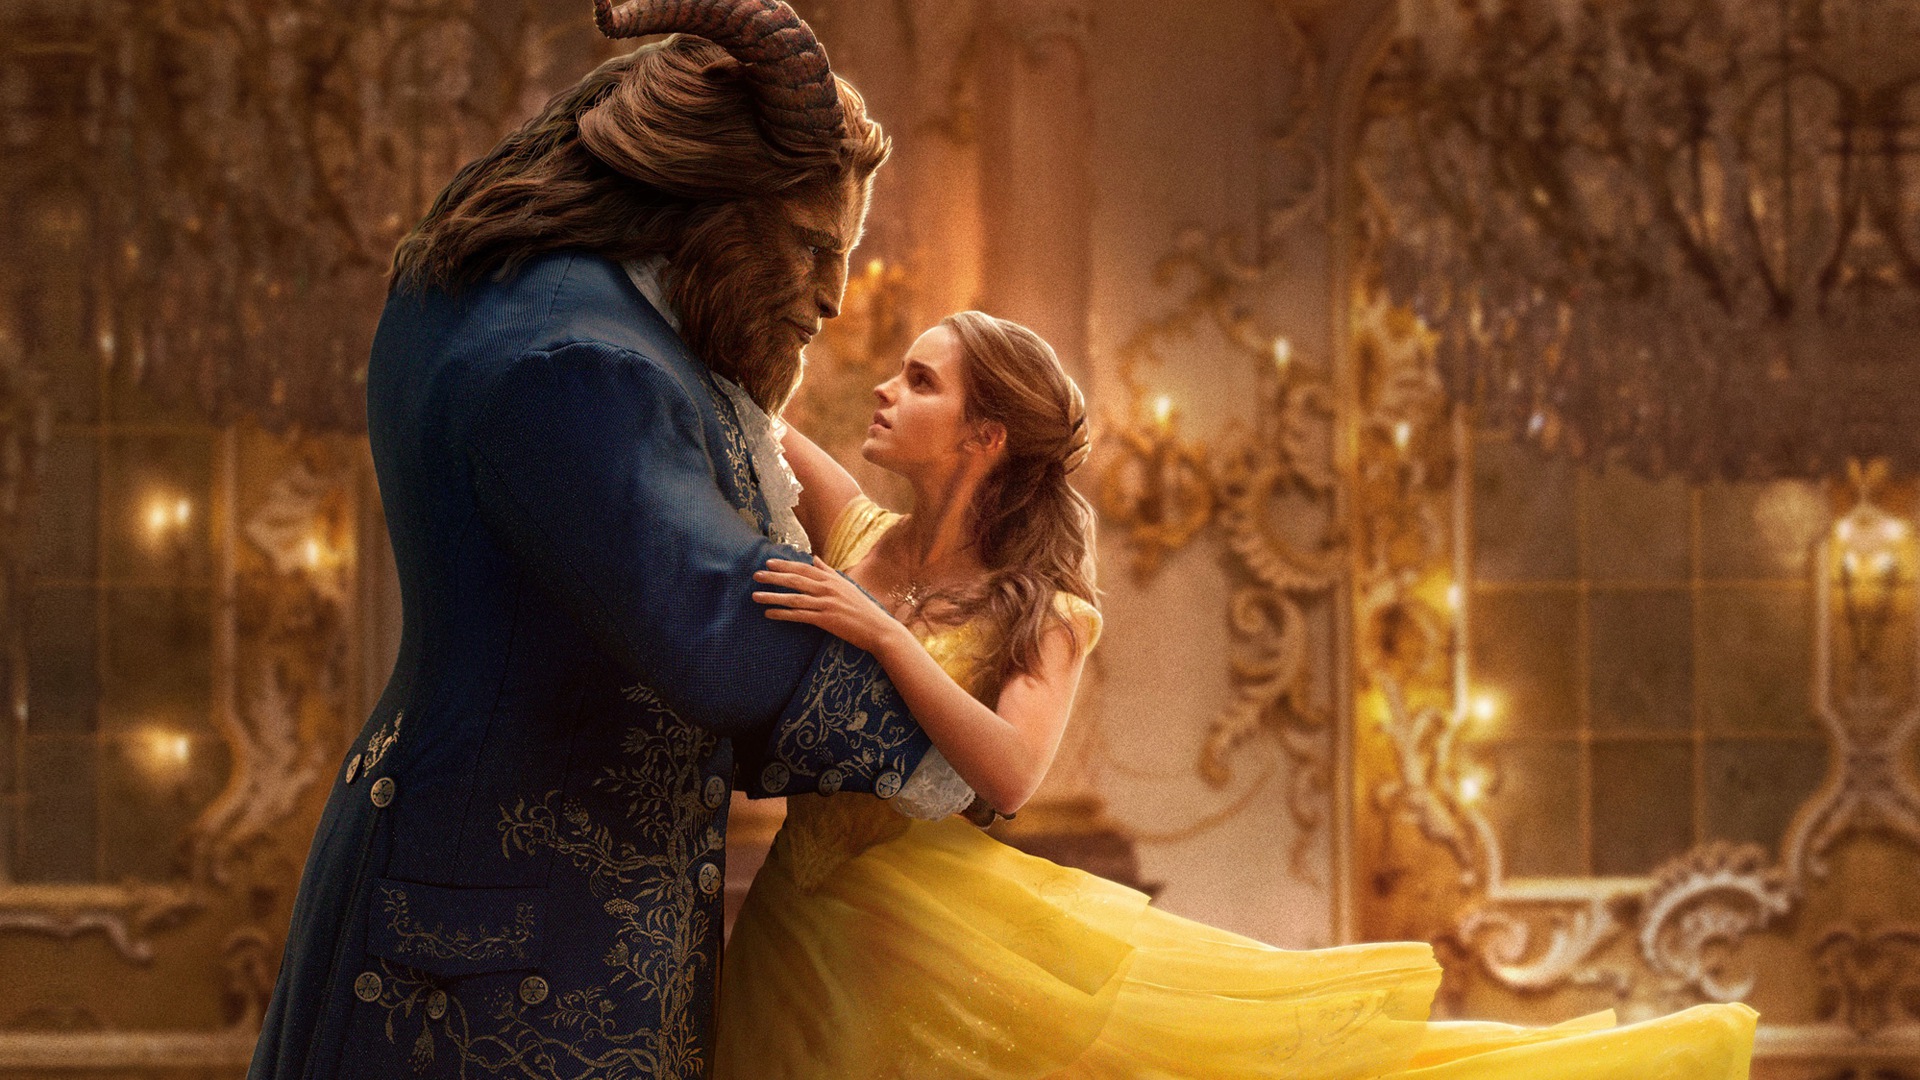 One Disney Fan’s Perspective on the Live Action Beauty and the Beast